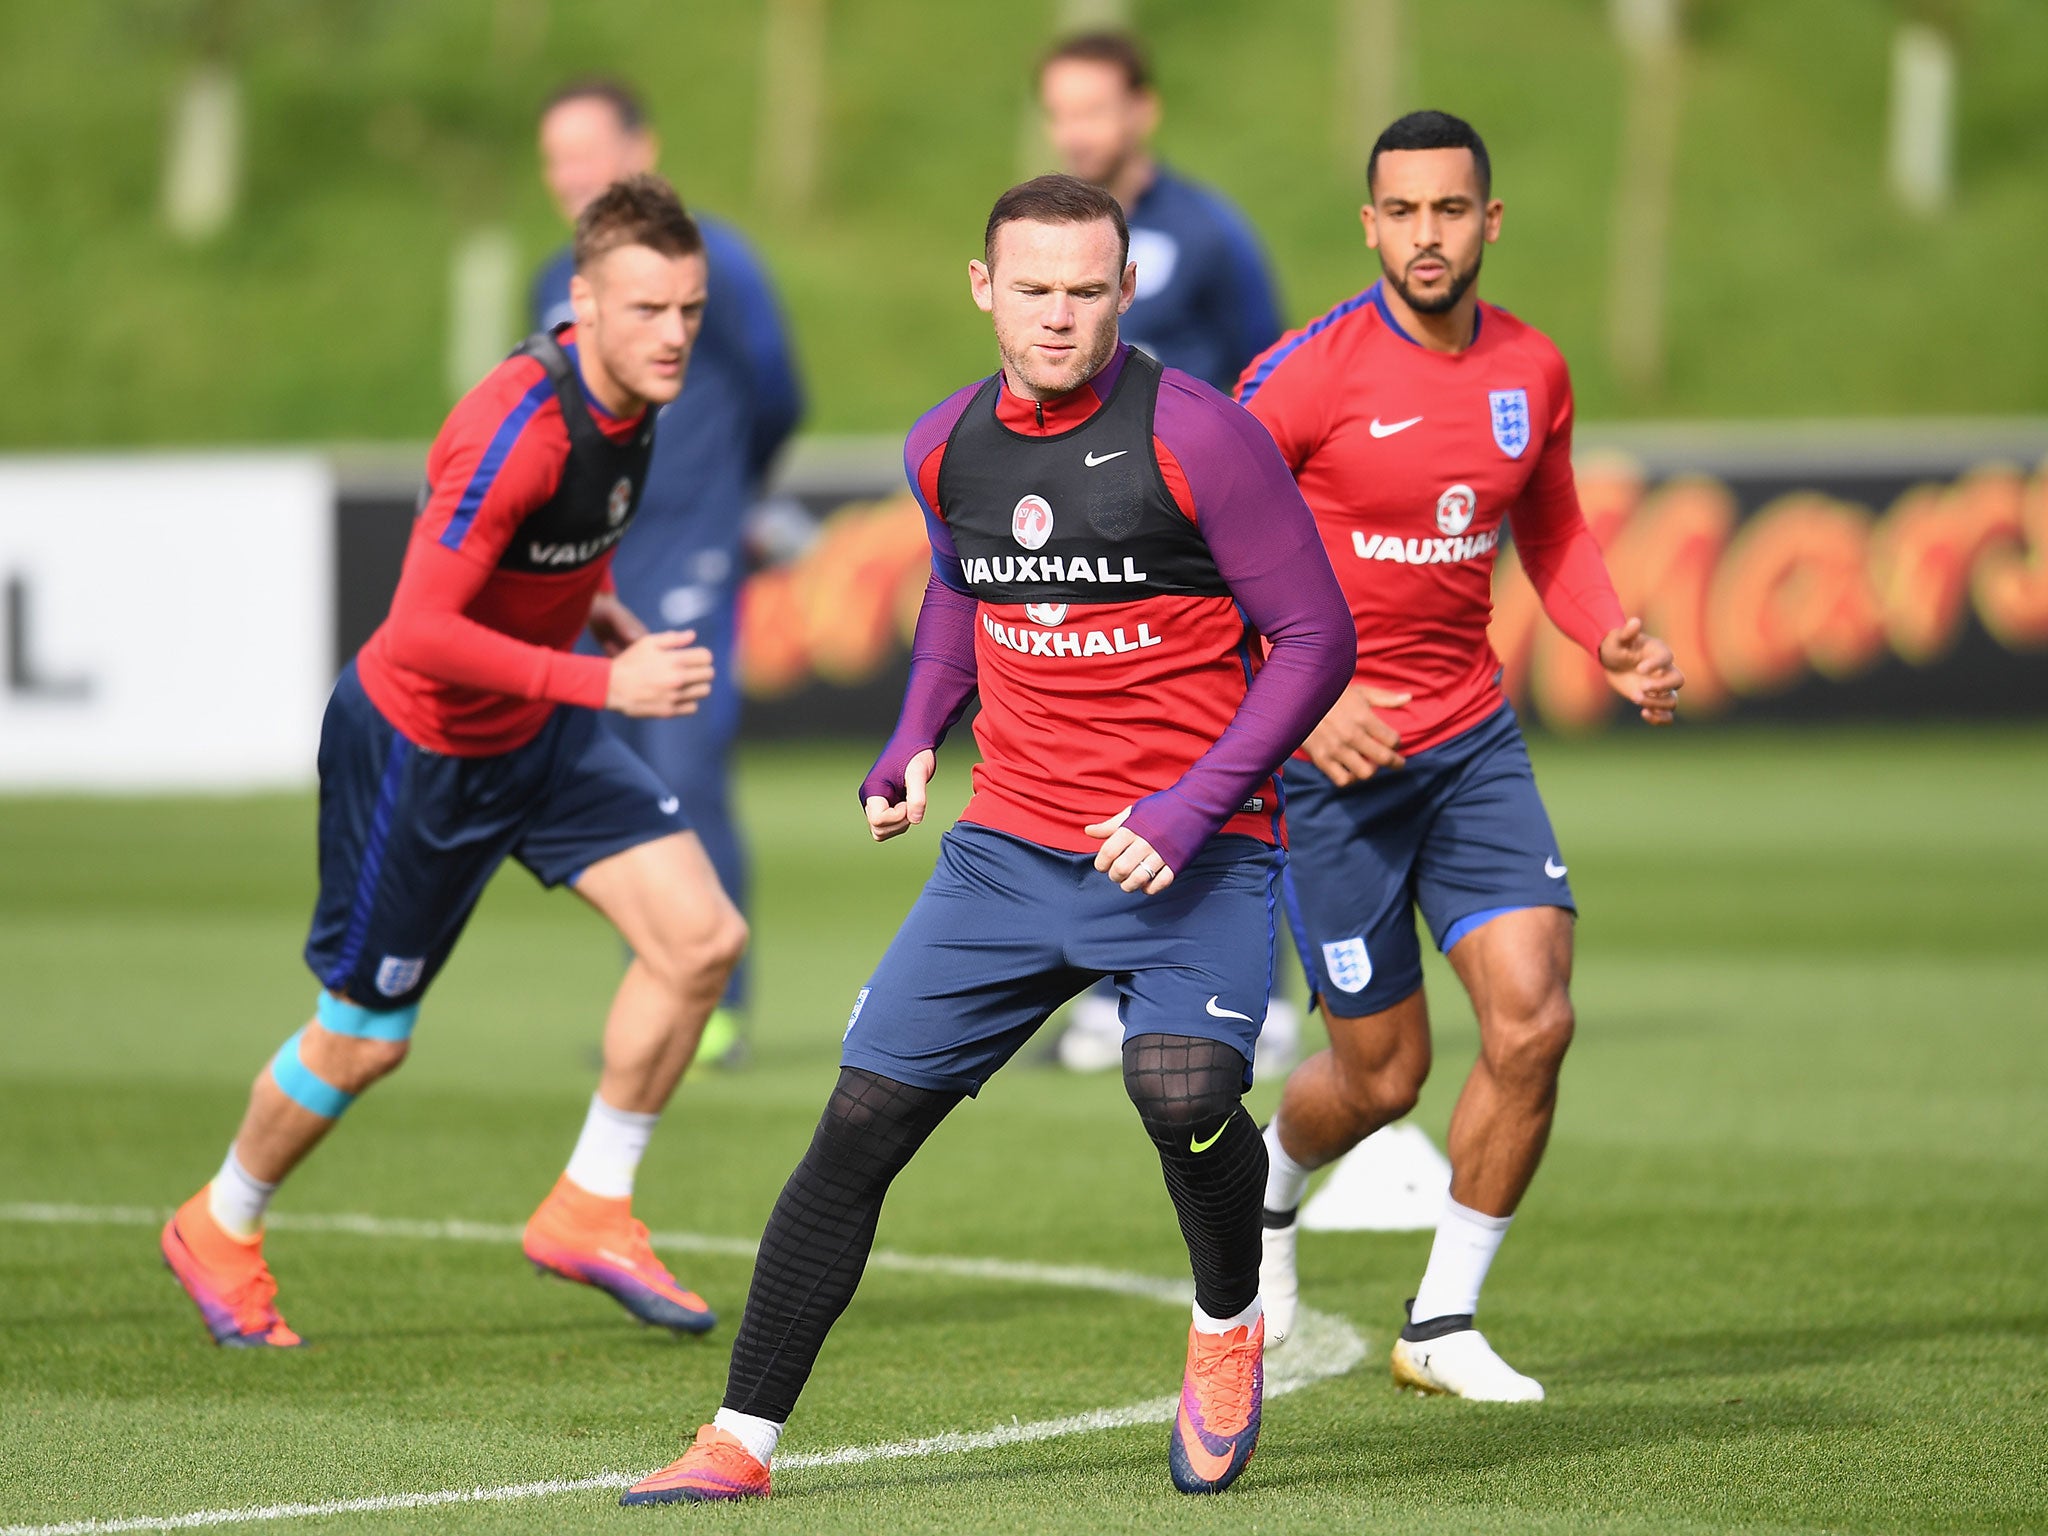 Wayne Rooney in training at St George's Park ahead of Saturday's game against Malta